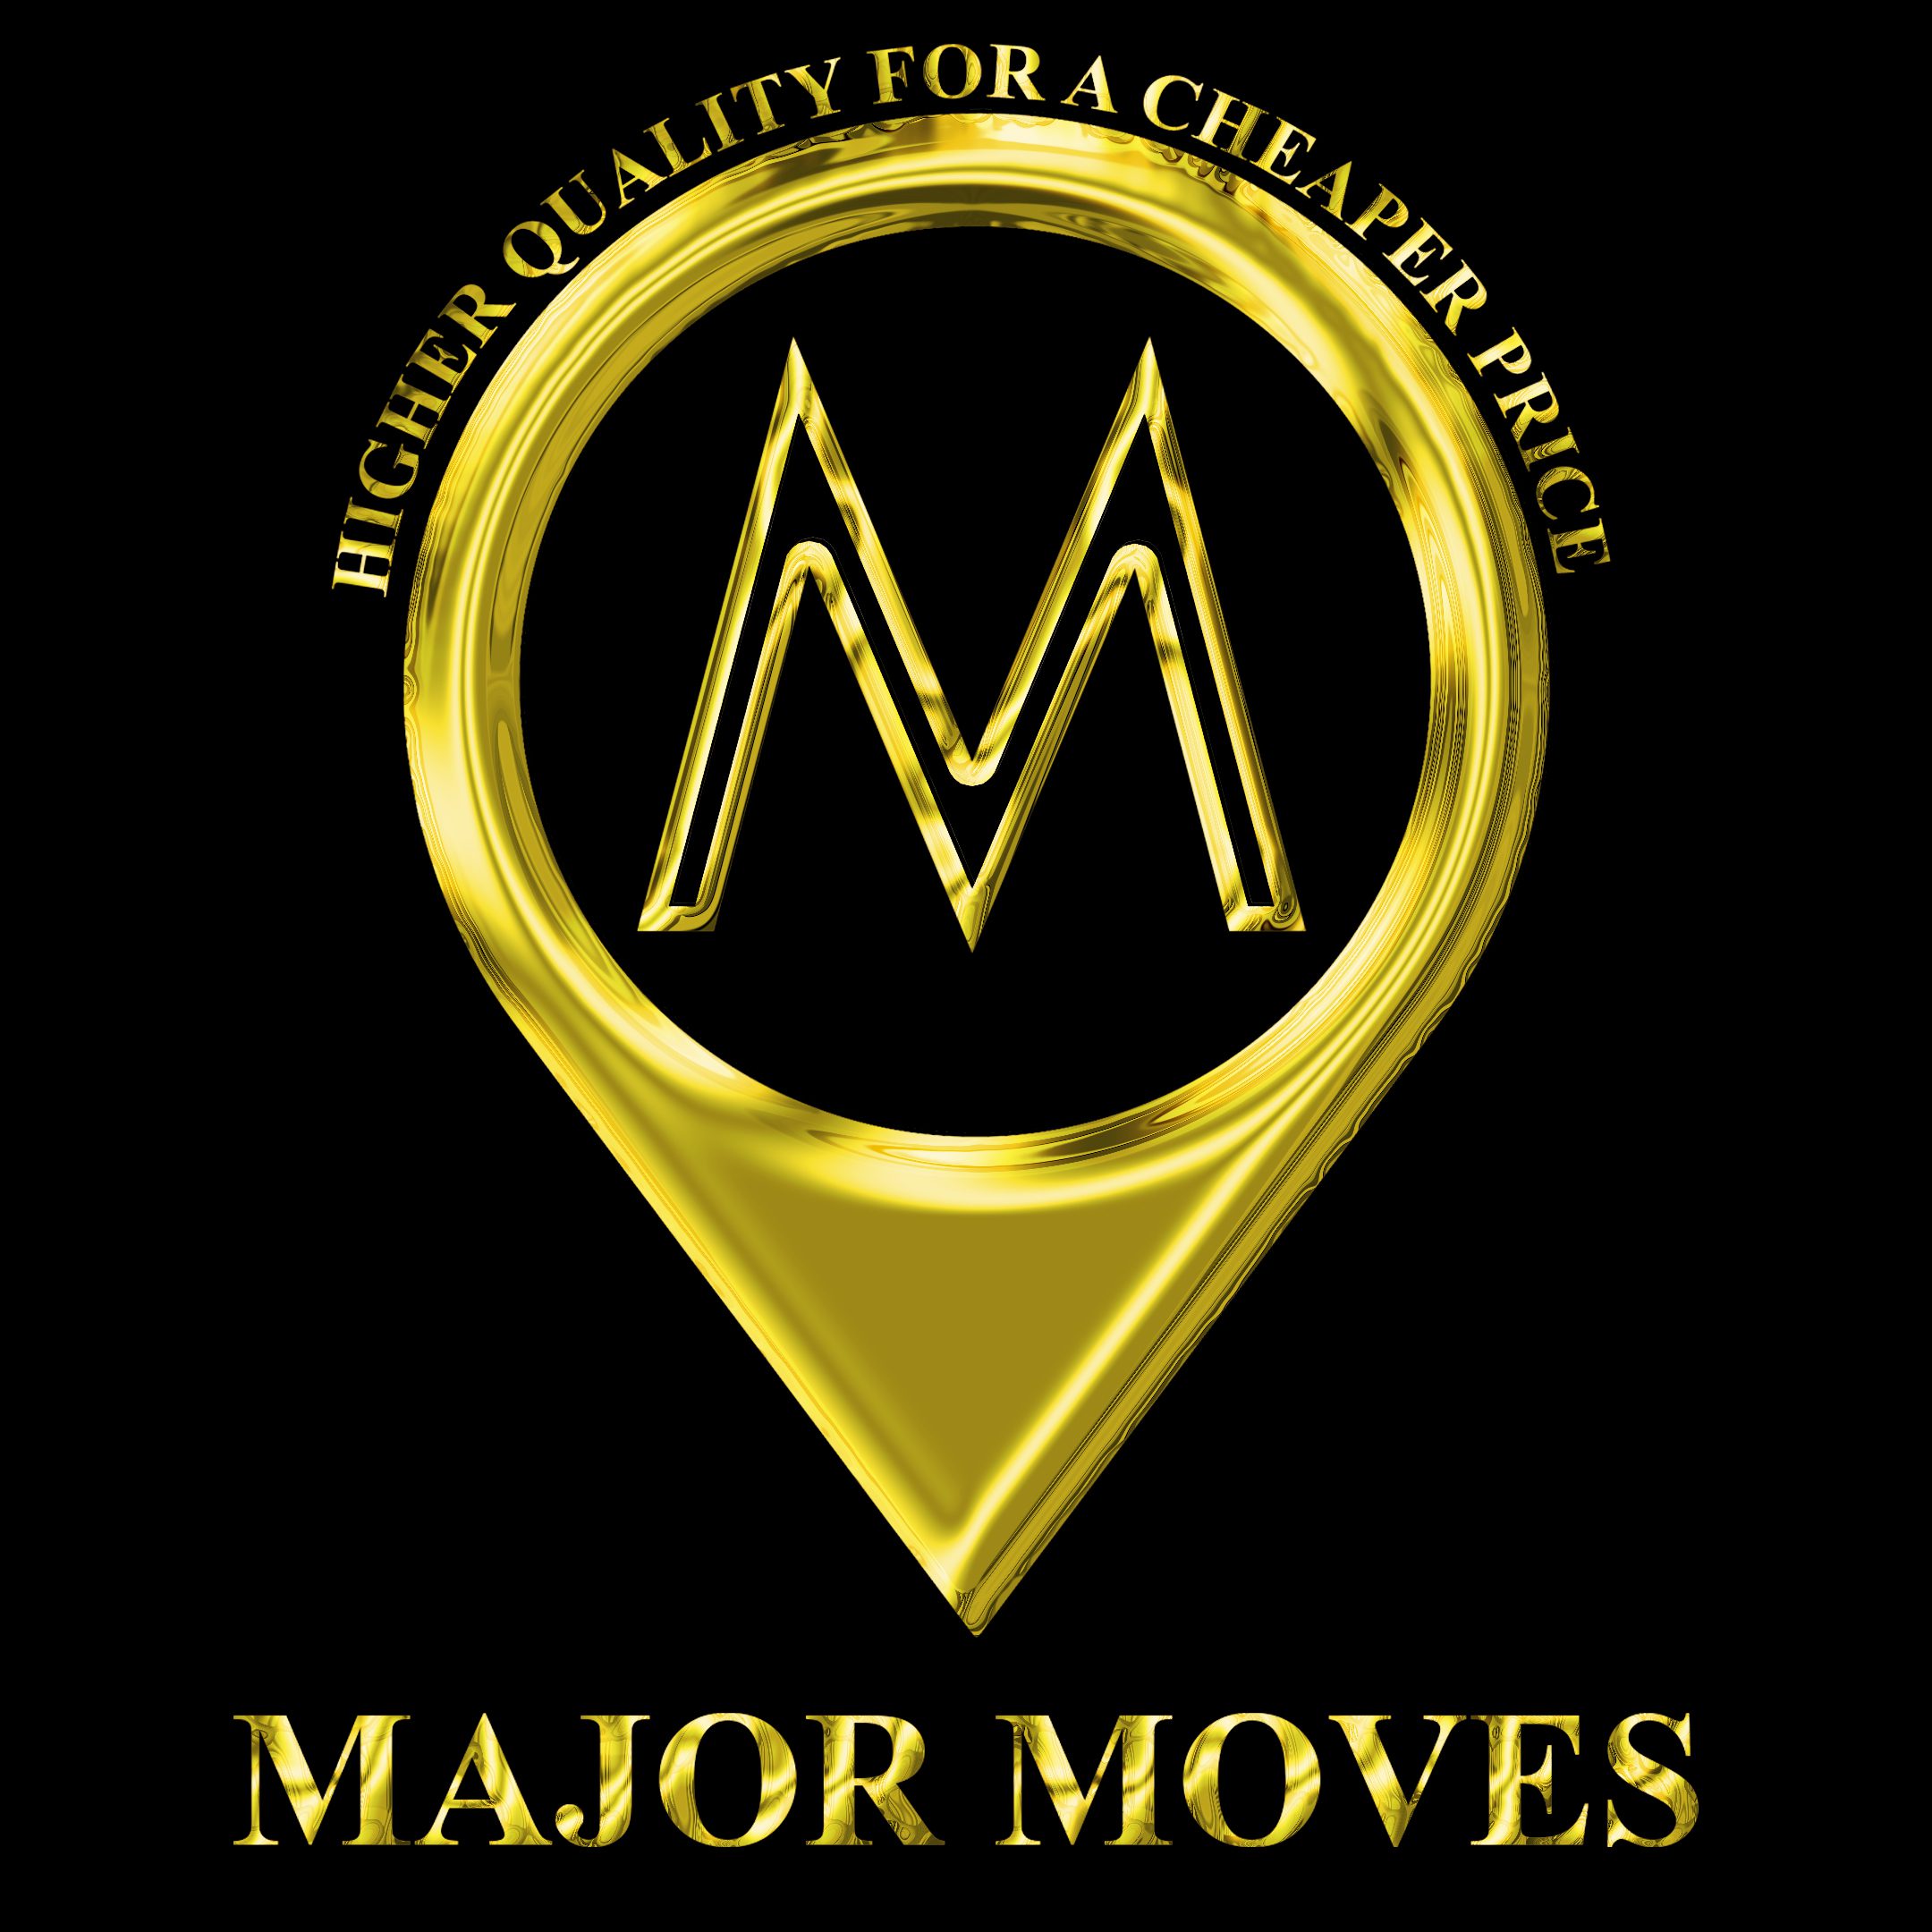 Welcome to Major Moves!